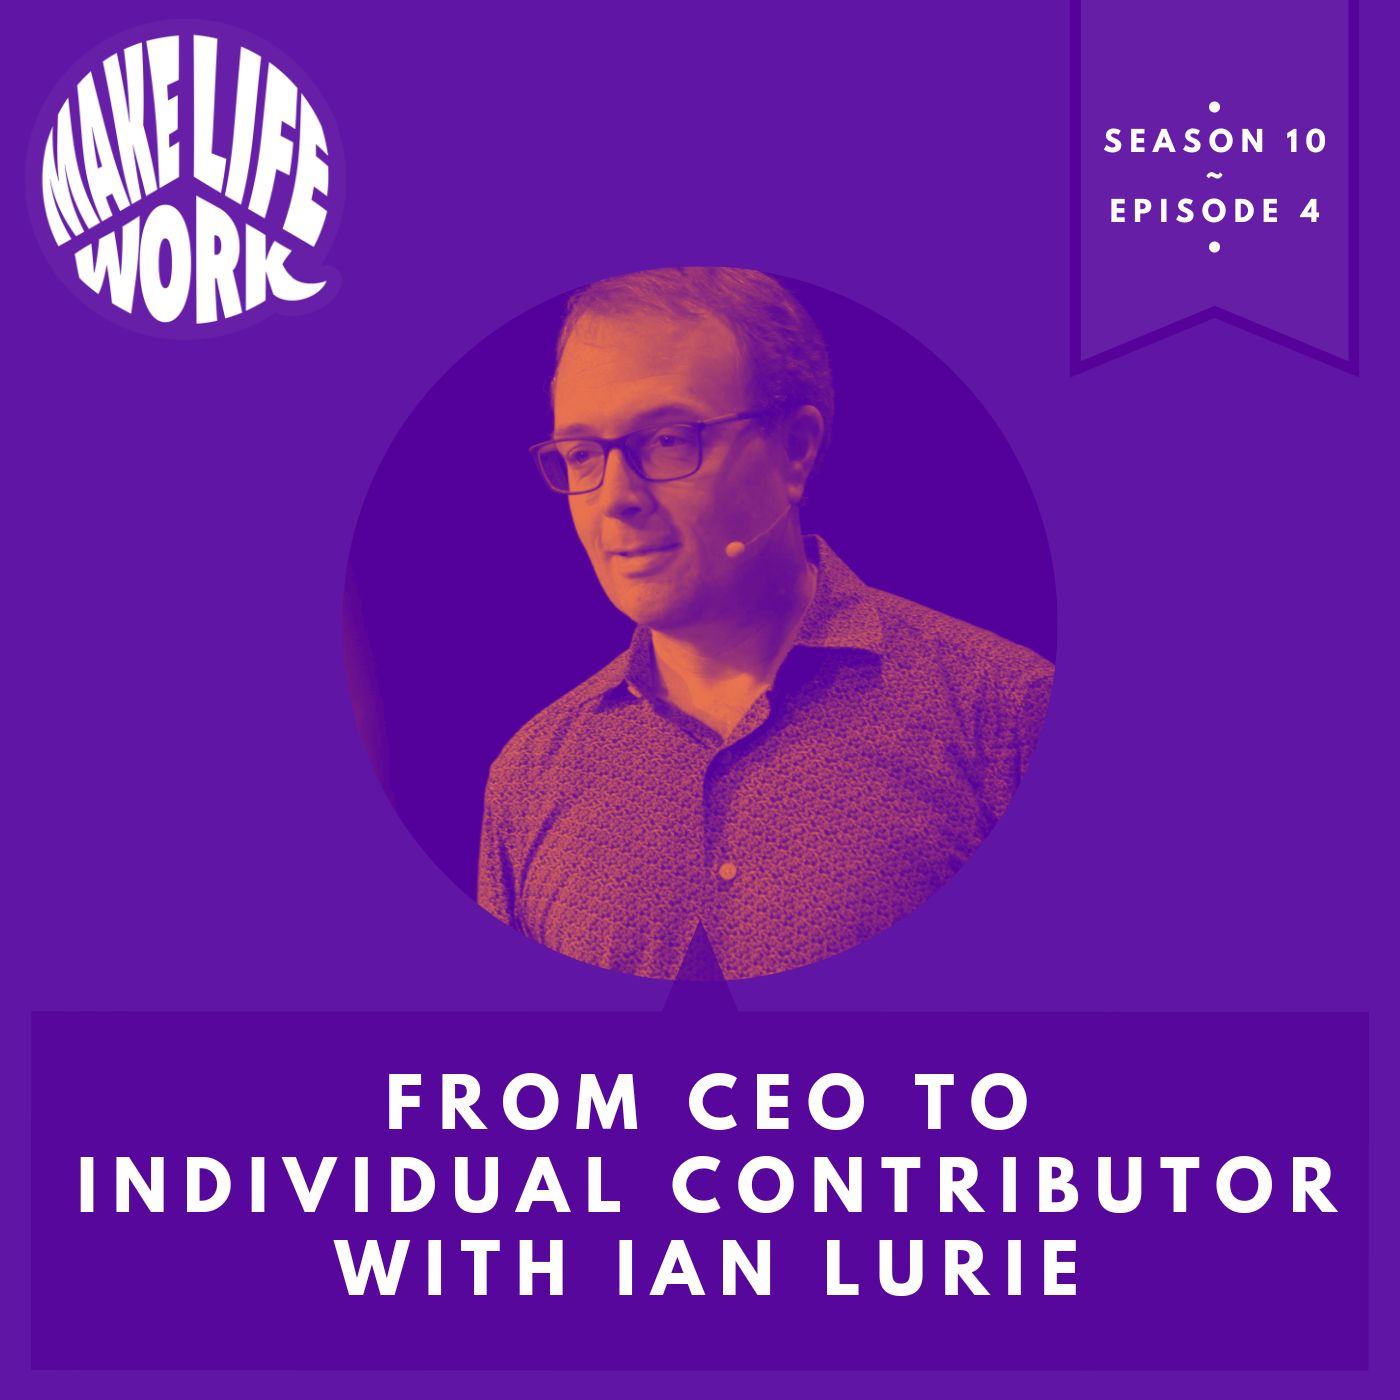 From CEO to individual contributor with Ian Lurie